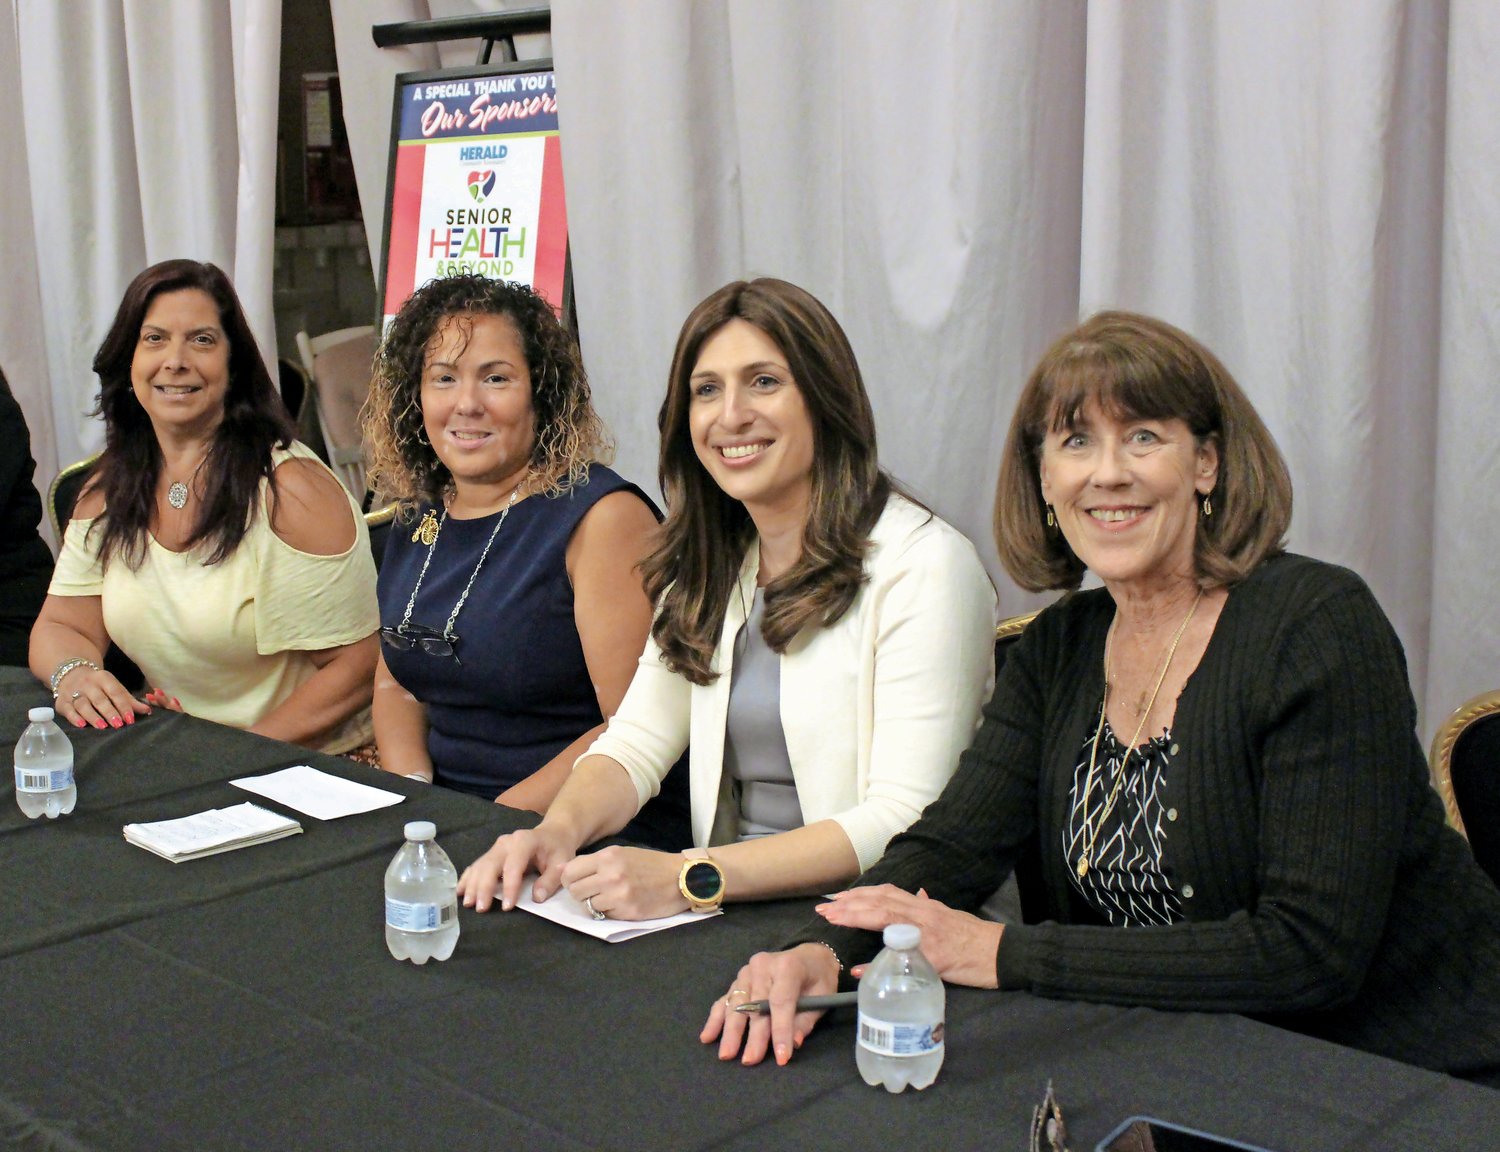 speakers included Gina Chmielewski, the Medicaid Coordinator at the Grandell Rehabilitation and Nursing Center in Long Beach; Xenia Vega, the Utility Consumer Assistance Specialist of the New York Department of Public Services; Dr. Esther Fogel, the Owner and Director of Comprehensive Audiology in Lynbrook; and Kathy Delcastillo, of Cassena Care and Long Beach Nursing and Rehabilitation Center.